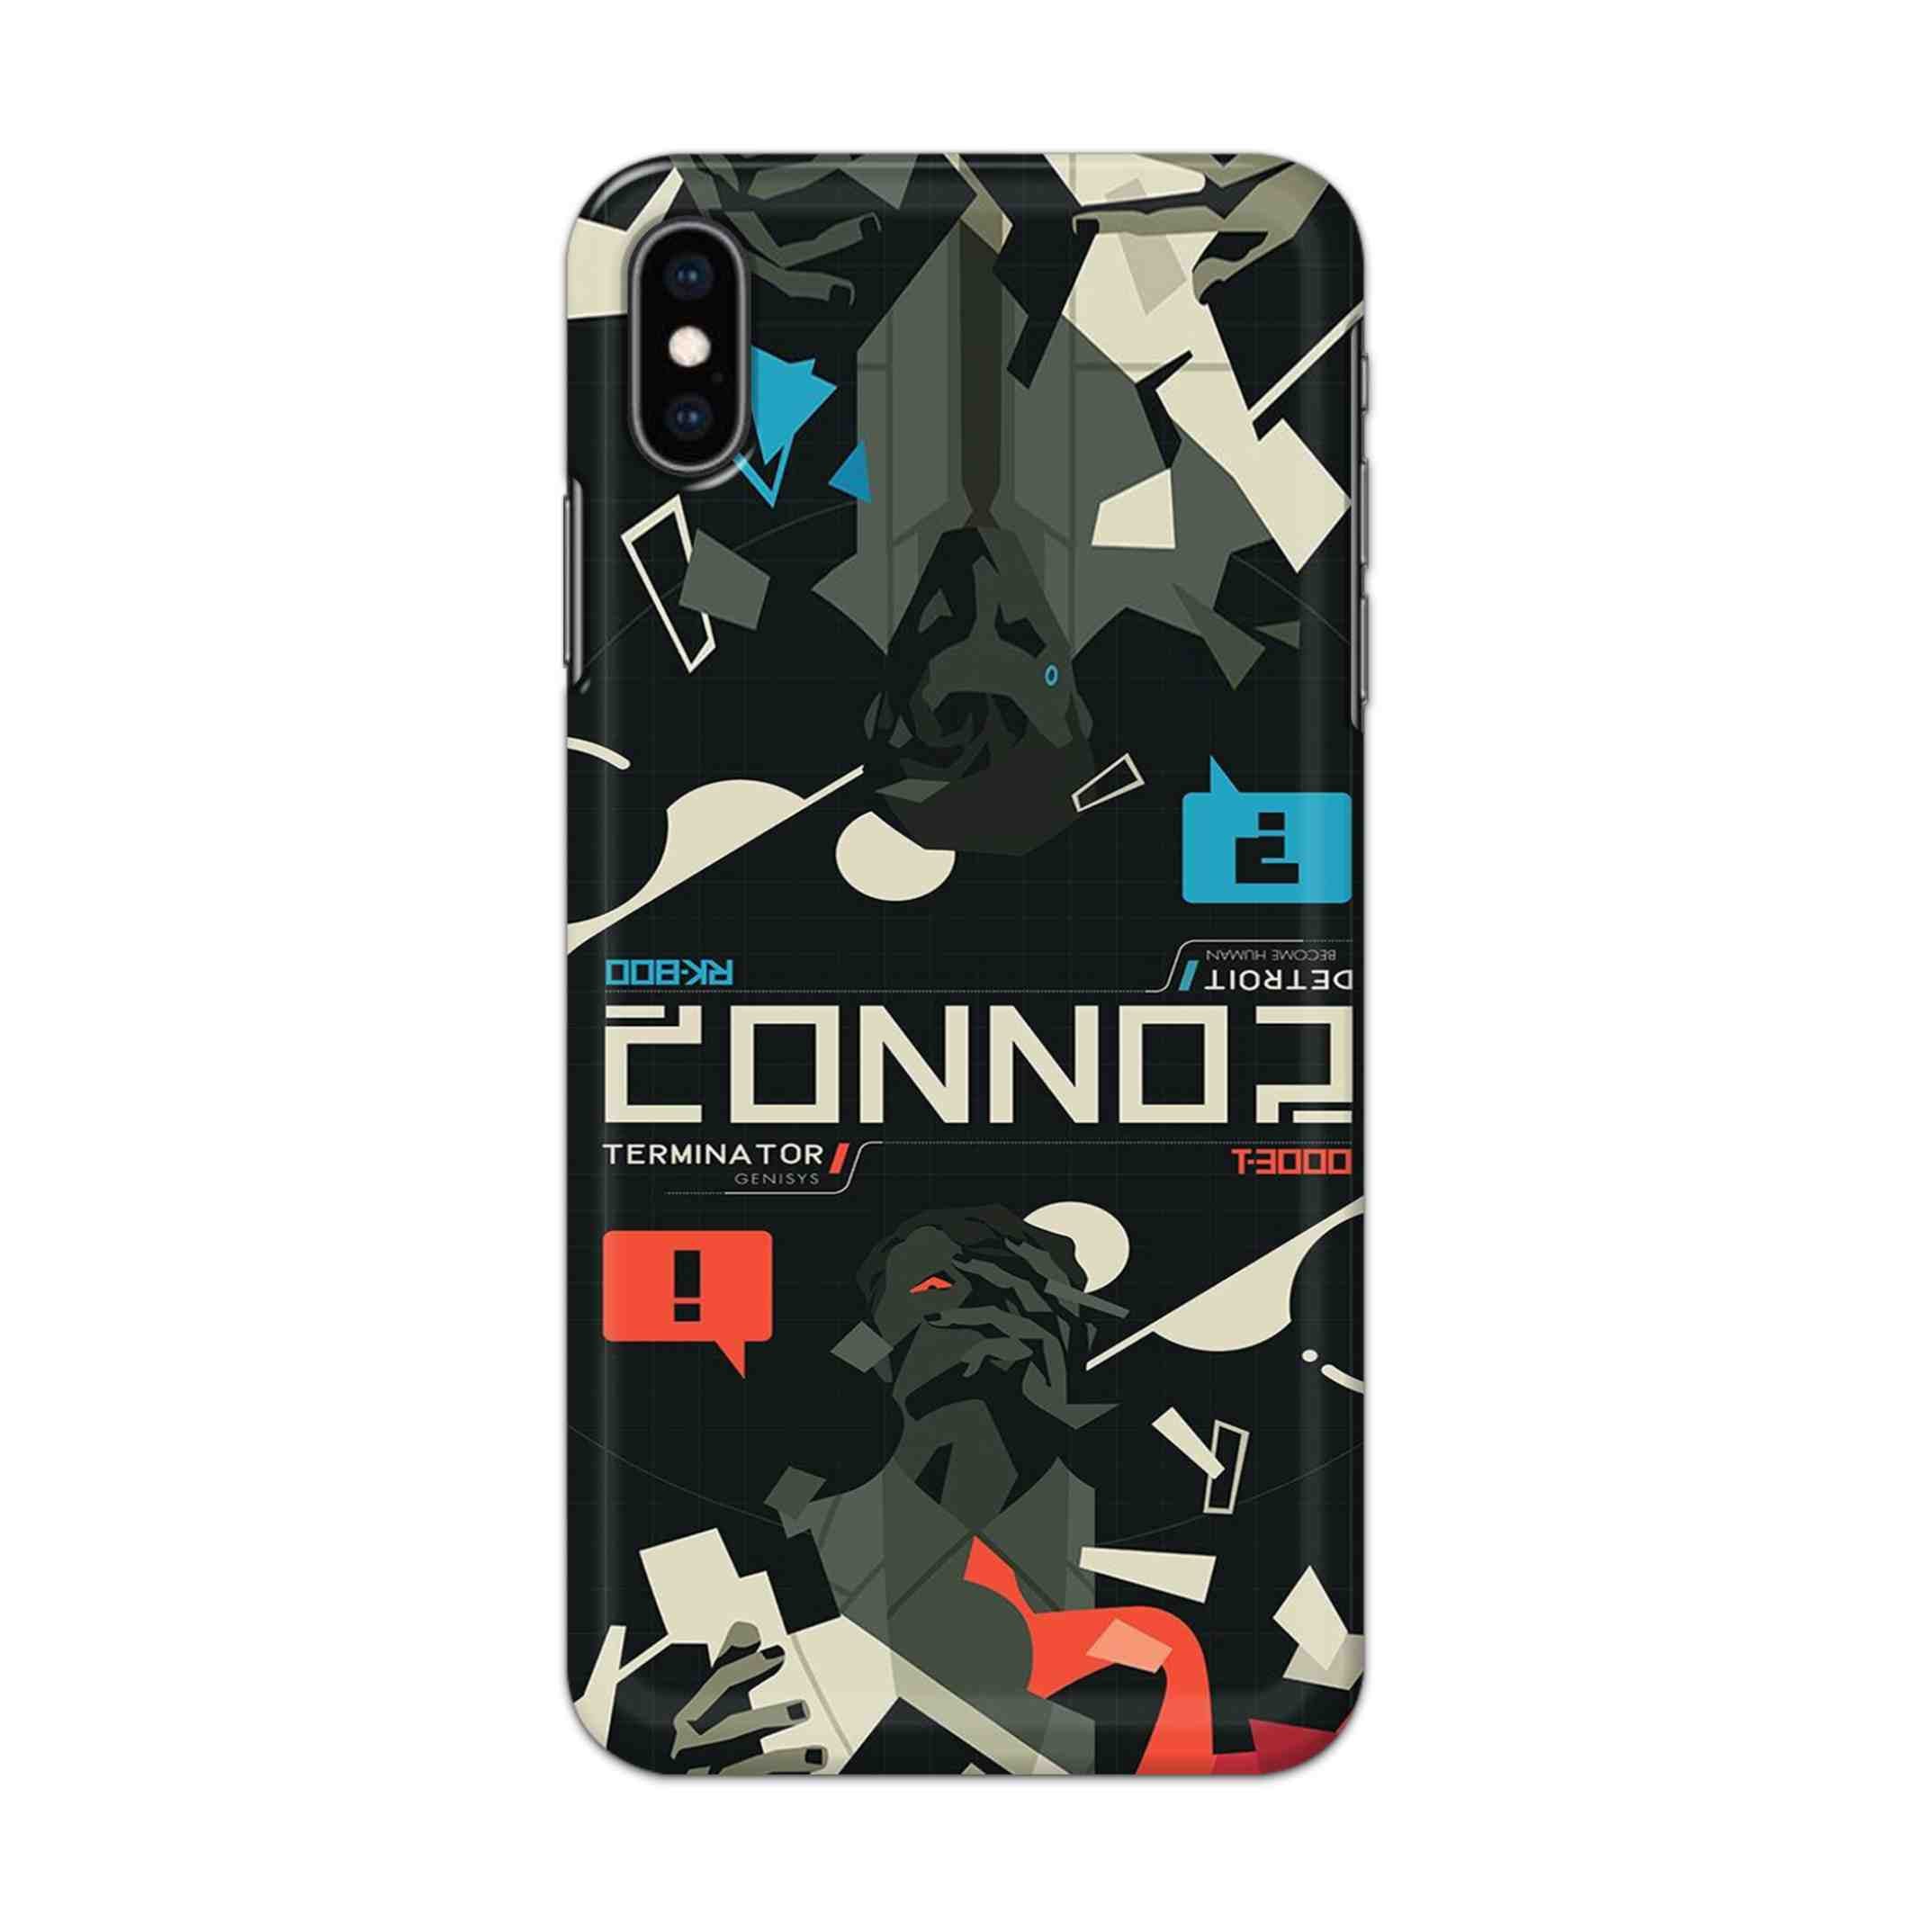 Buy Terminator Hard Back Mobile Phone Case/Cover For iPhone XS MAX Online